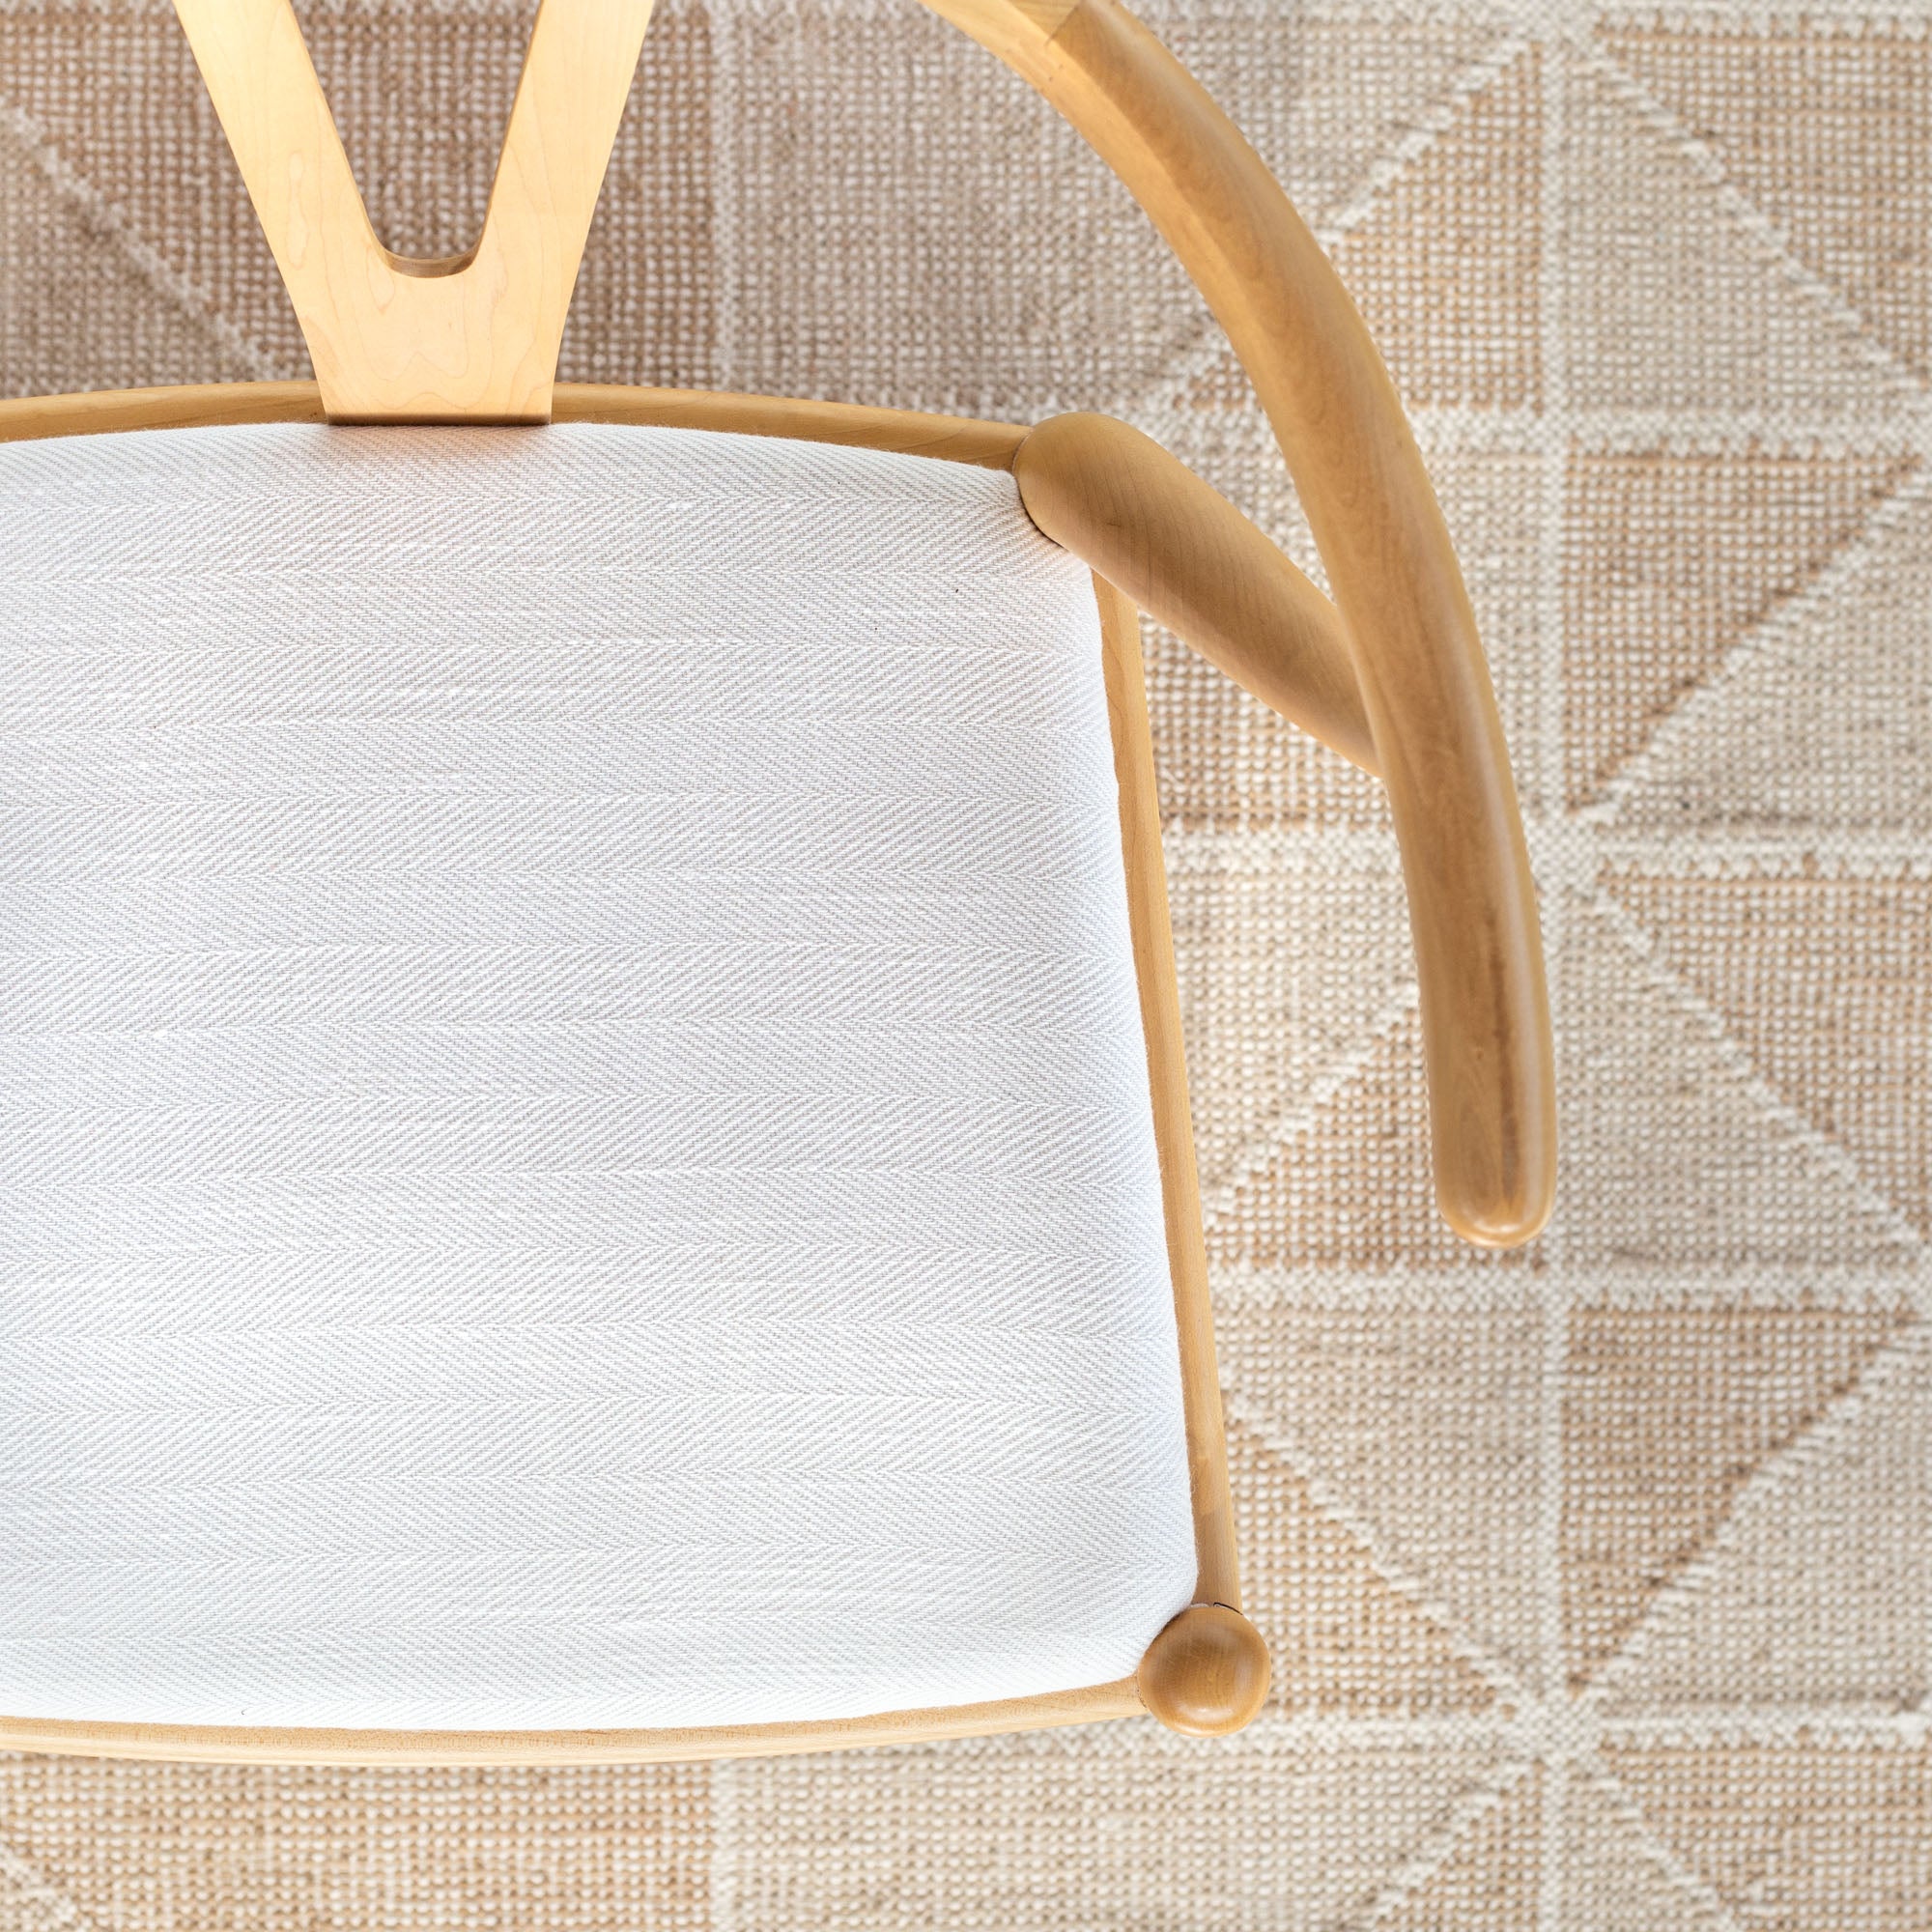 Upholstered dining chair seat cushion. White high performance upholstery fabric with a herringbone pattern and texture.